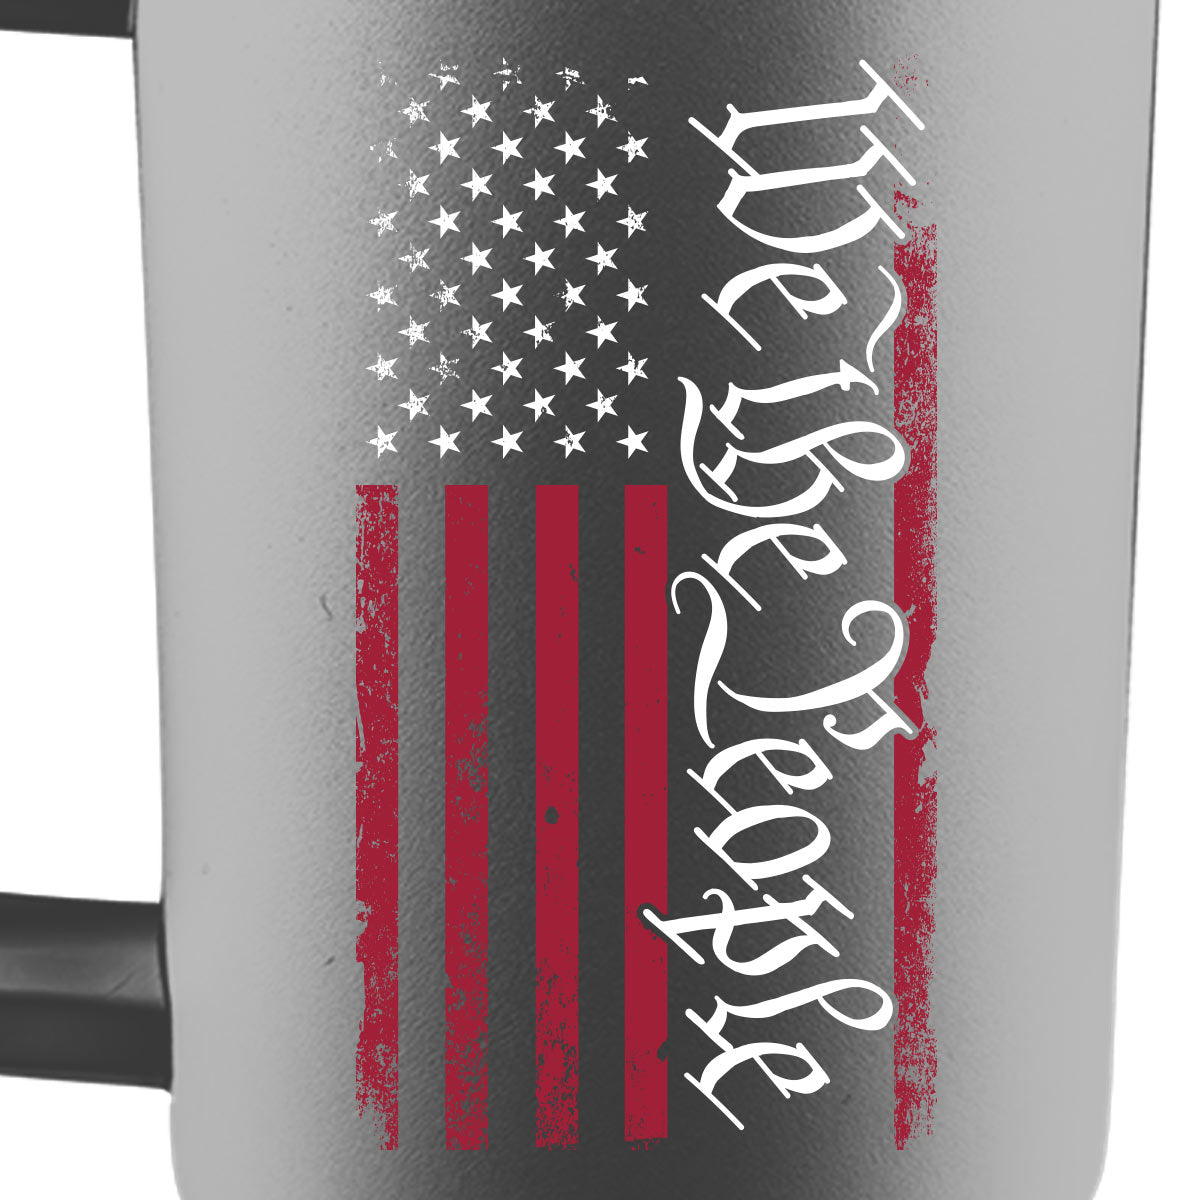 HOLD FAST 40 oz Stainless Steel Mug With Straw We The People Flag